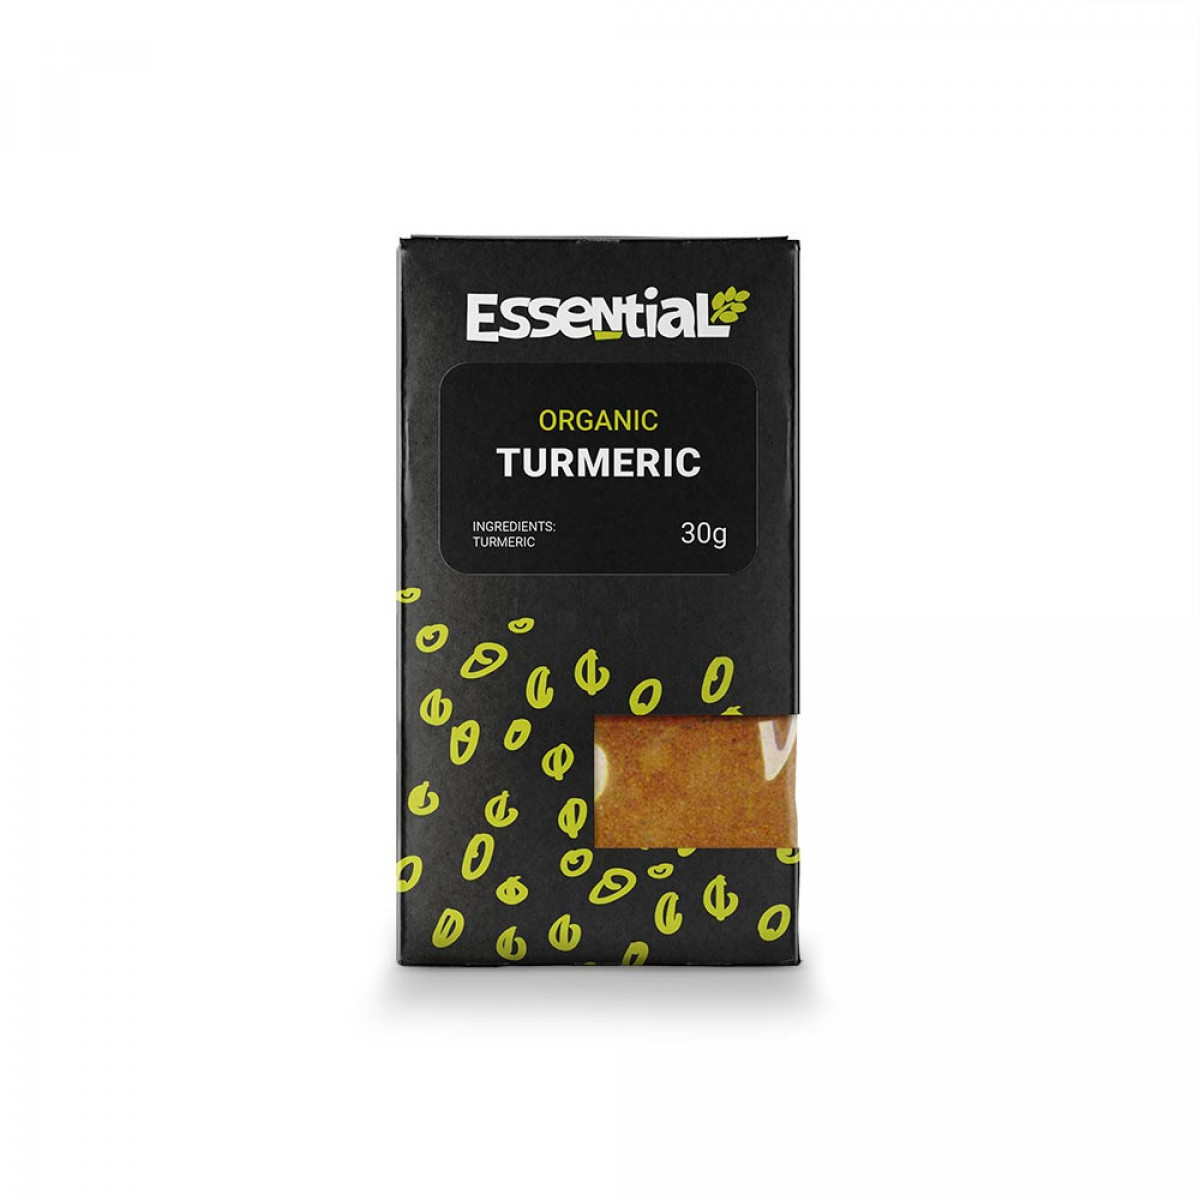 Product picture for Turmeric